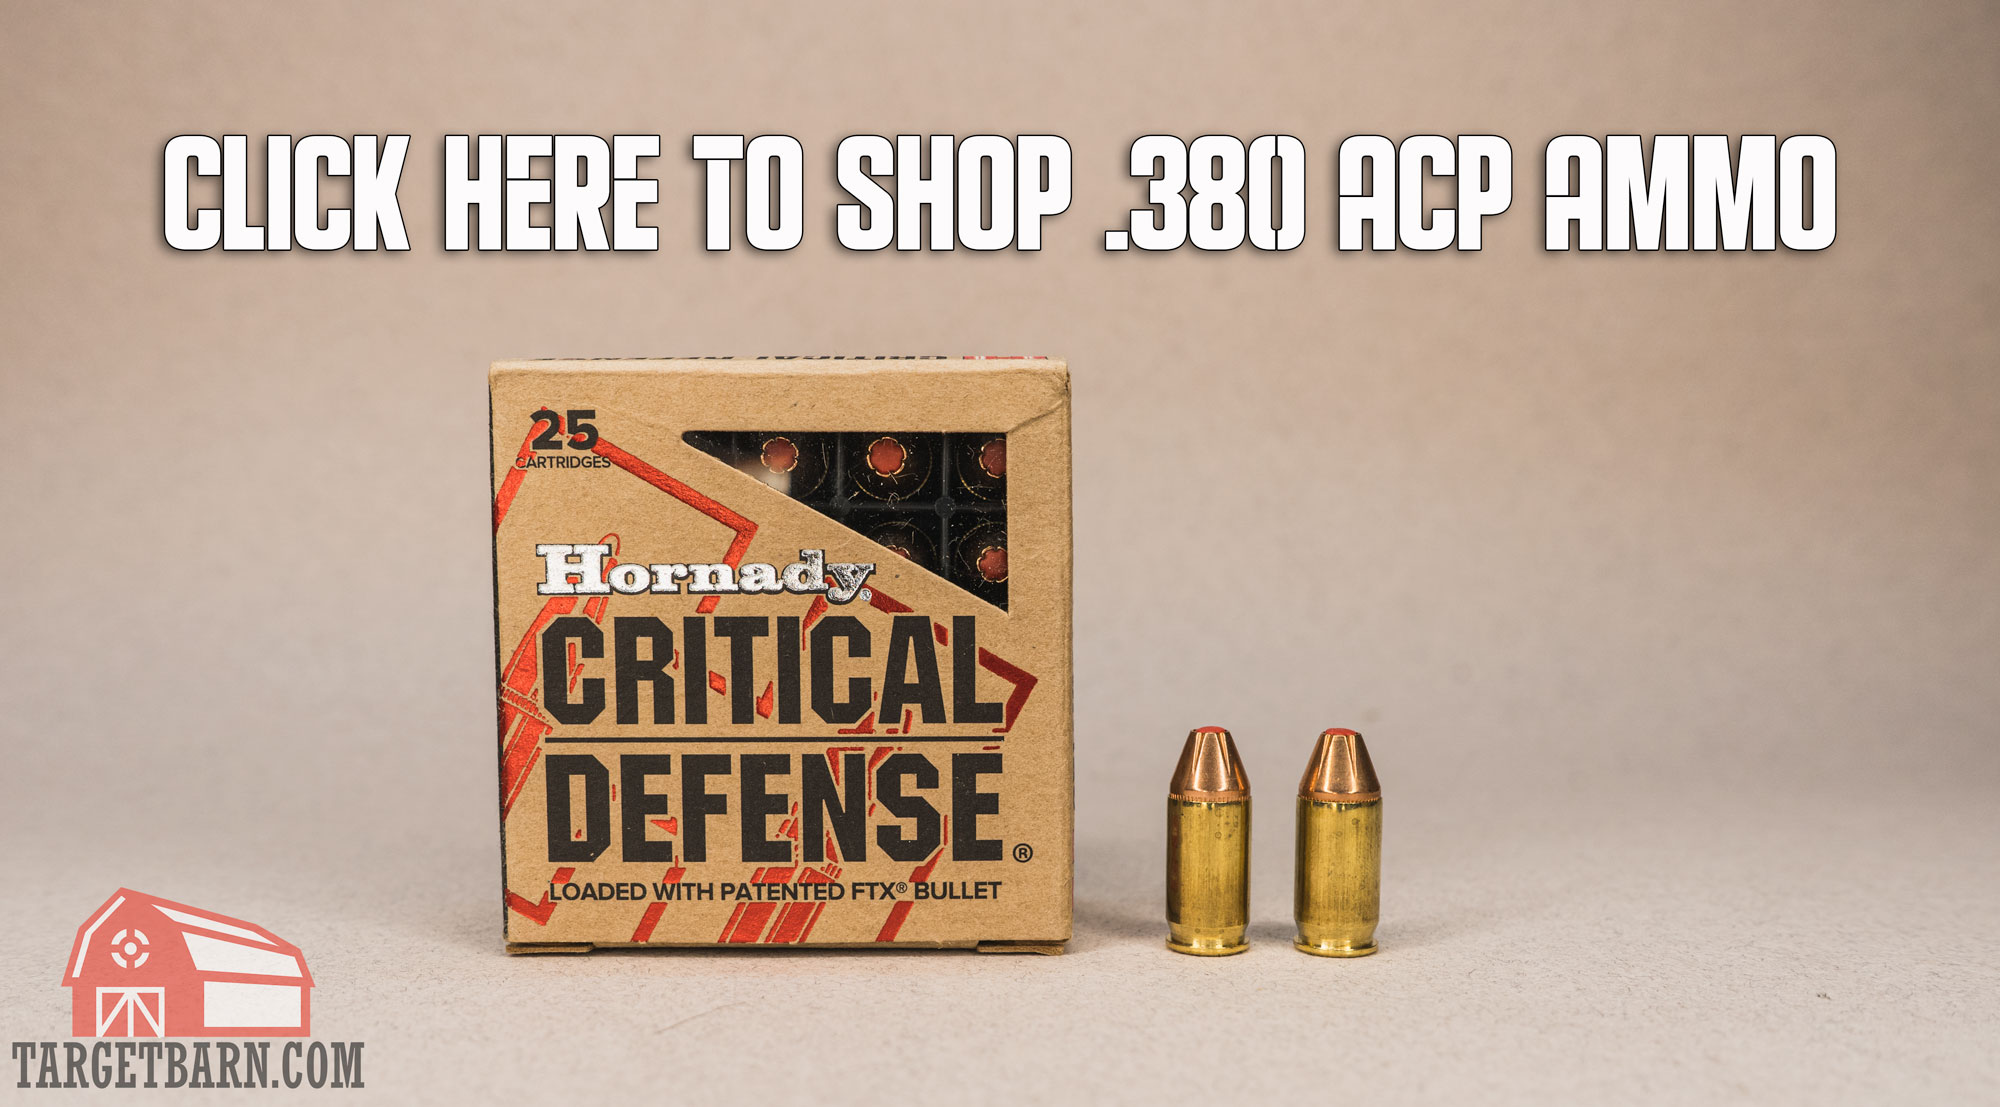 a box and two rounds of critical defense 380 with the text click here to shop 380 acp ammo